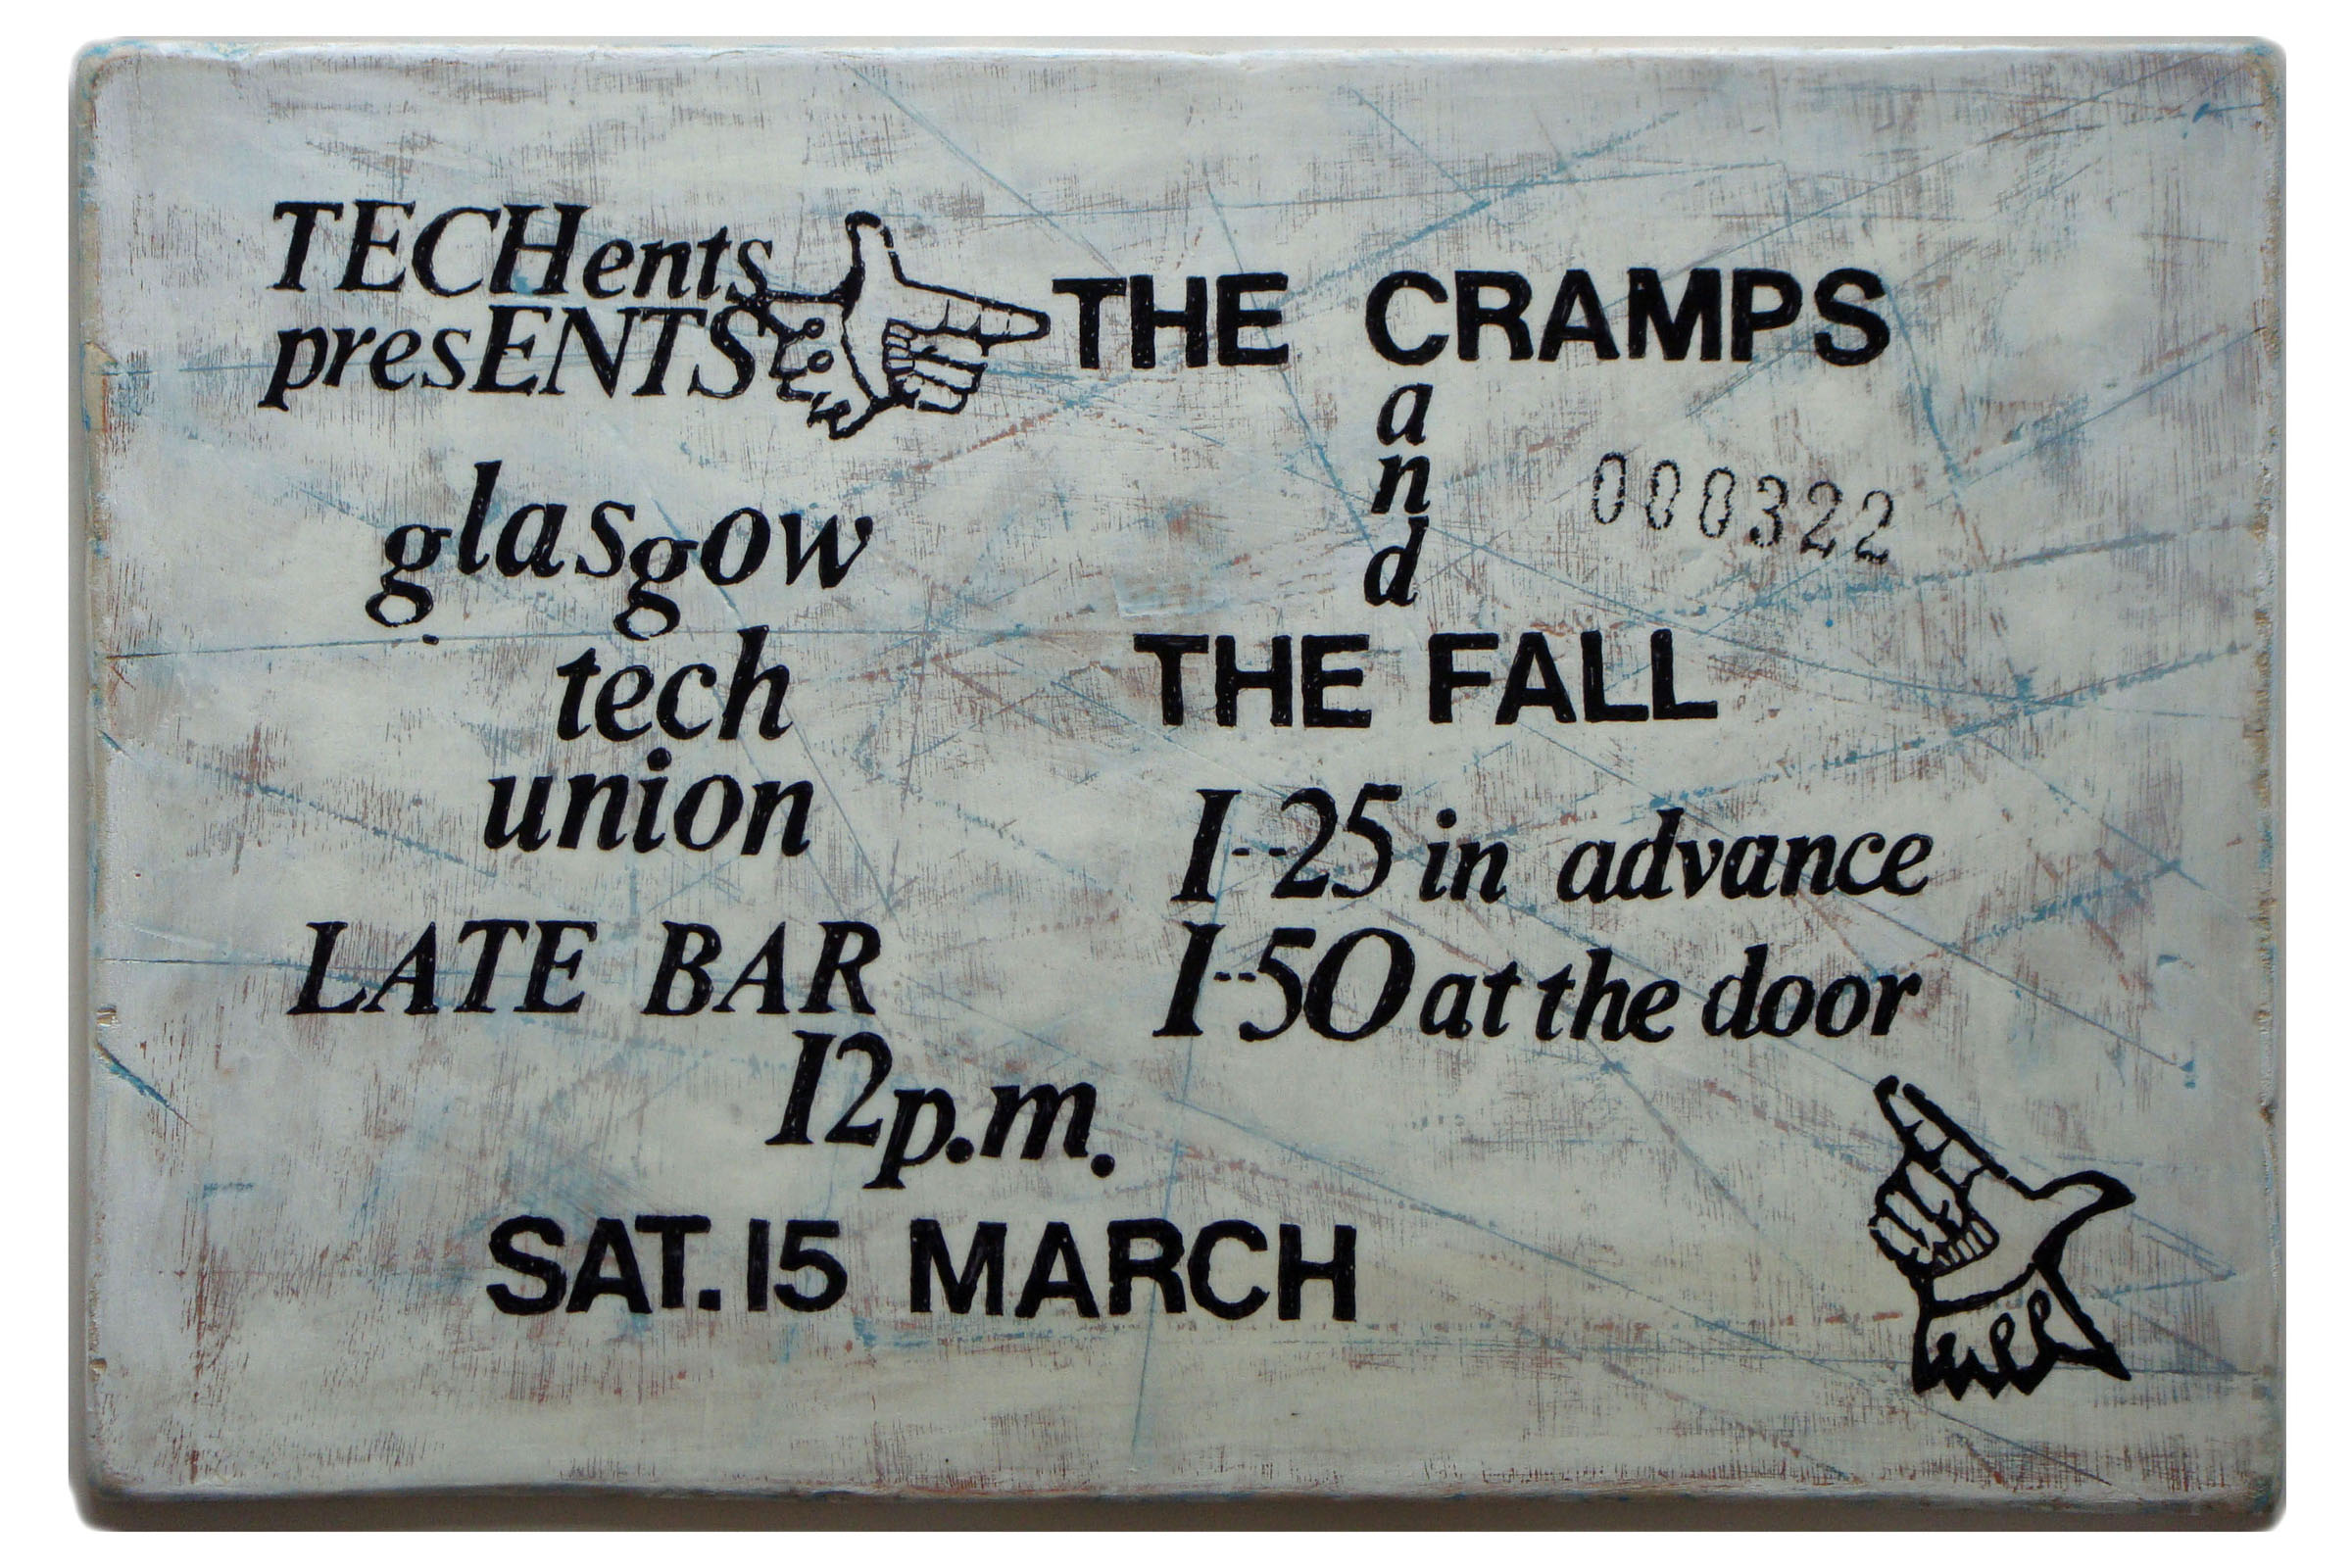 The Cramps and the Fall<br>Glasgow Tech Union<br>Mixed media on plywood<br>46 x 31cm